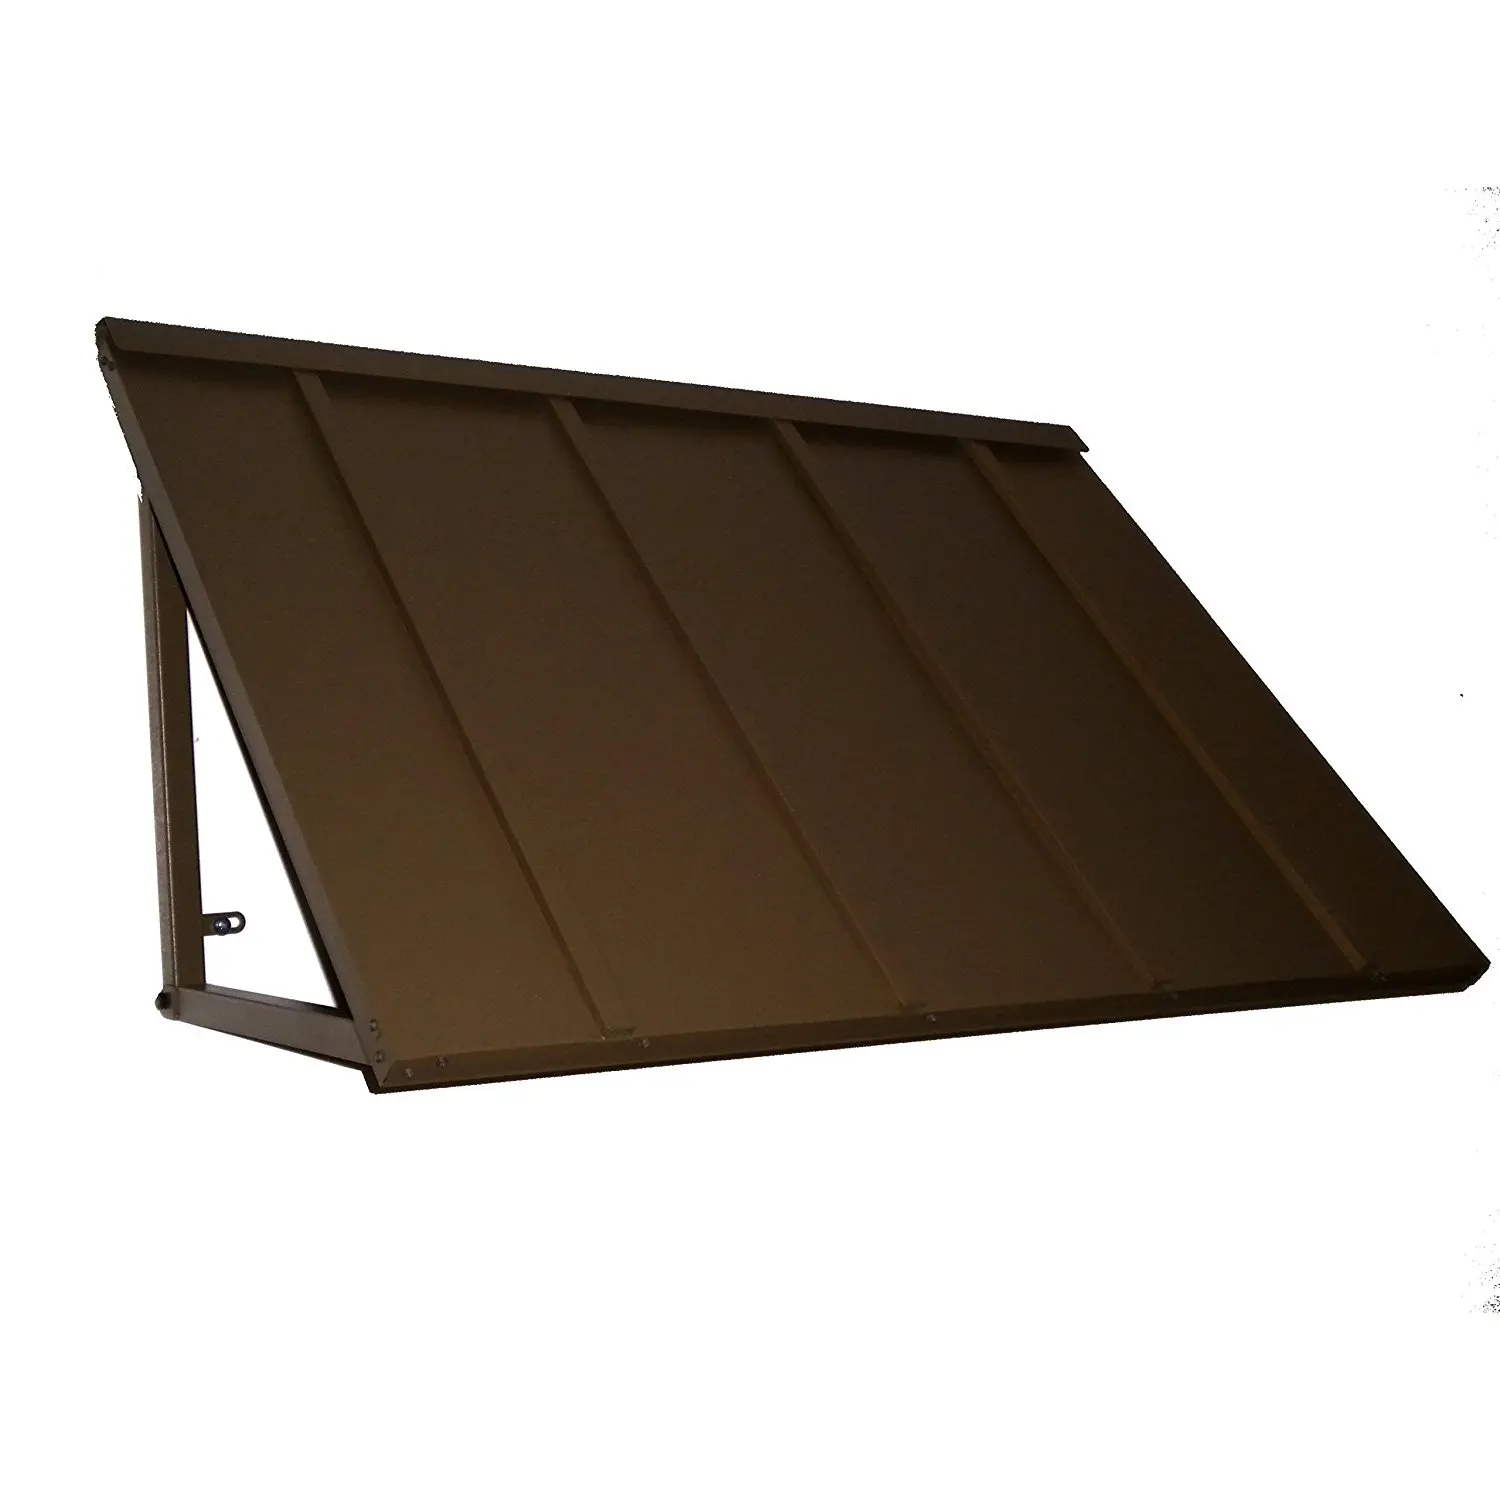 Cheap Door Awnings Lowes Find Door Awnings Lowes Deals On Line At